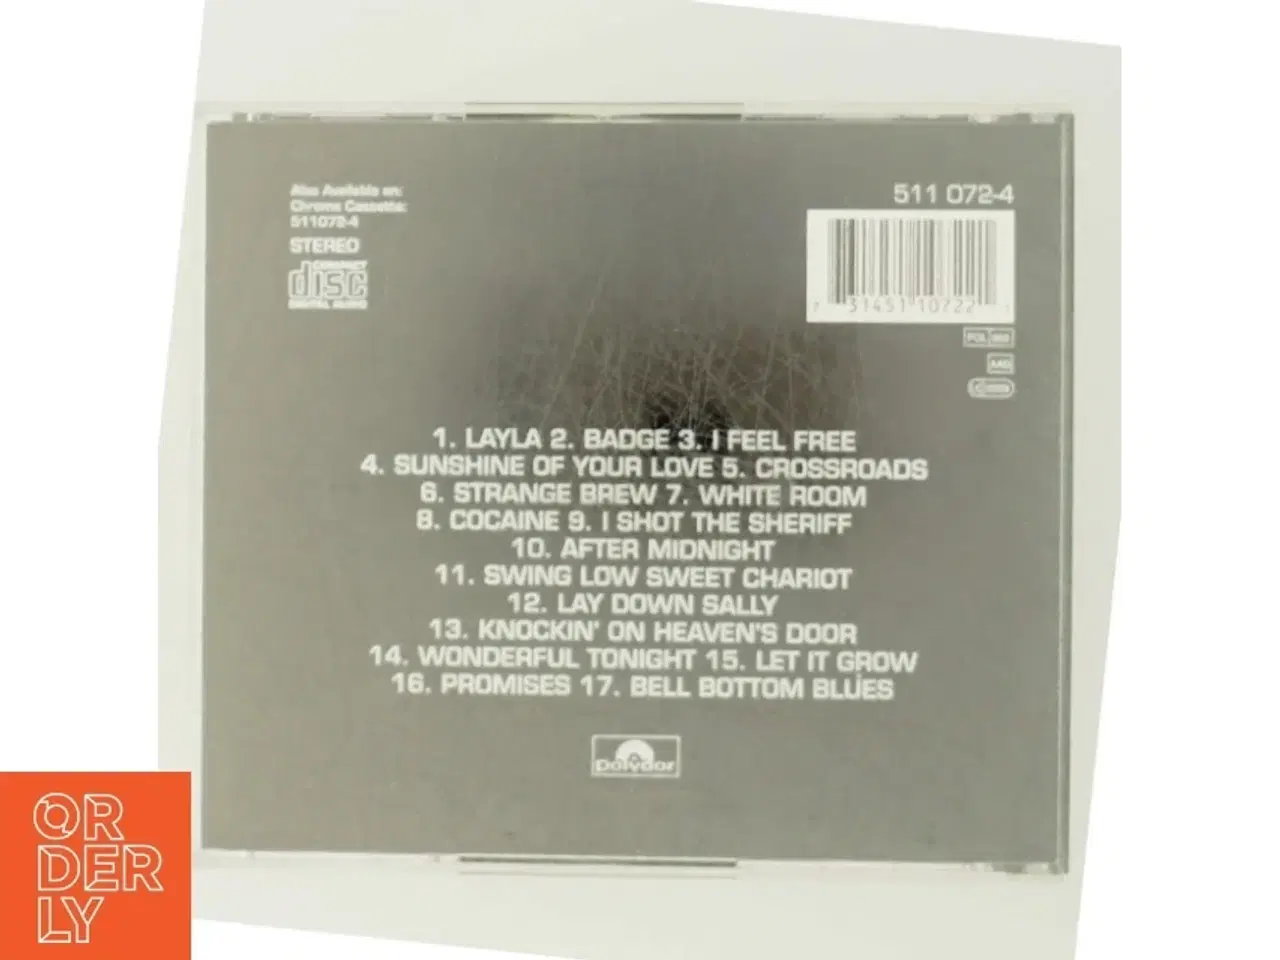 Billede 3 - Eric Clapton CD - The Best of Eric Clapton fra Polydor Records